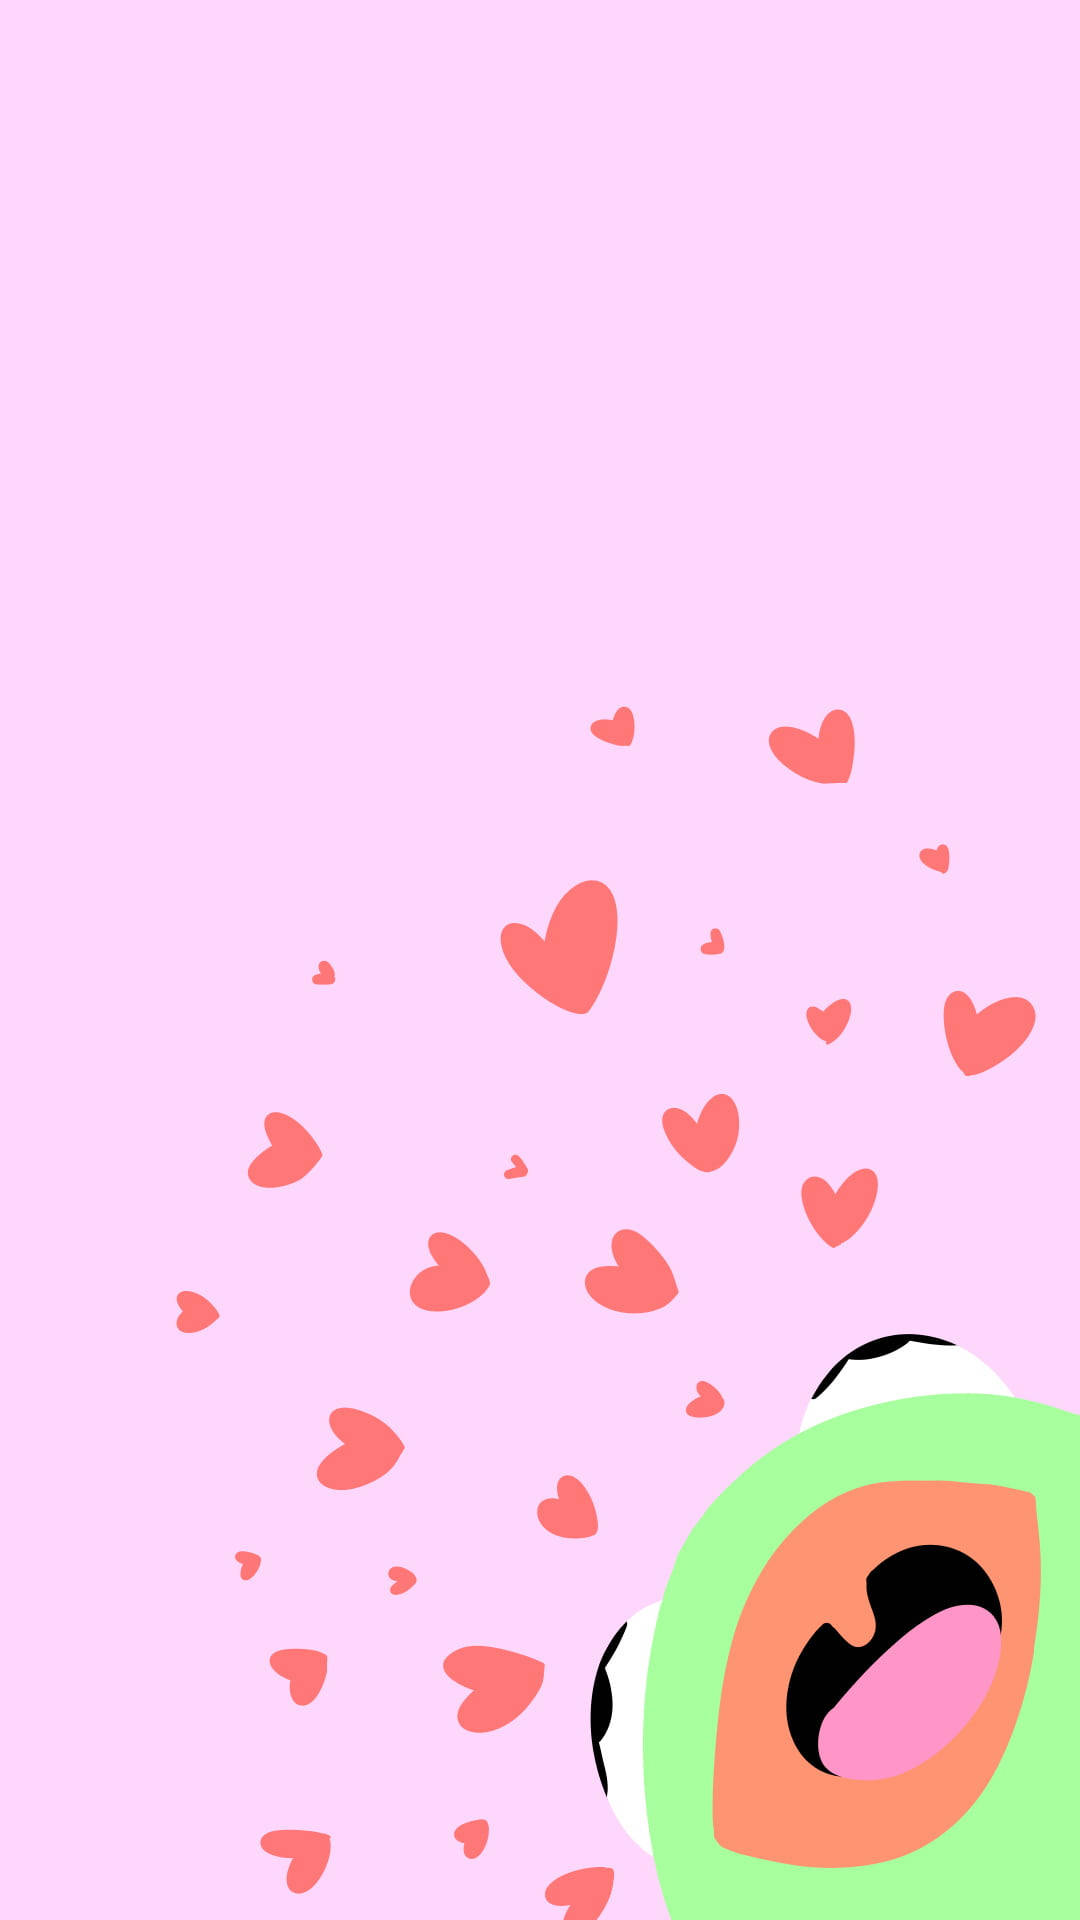 Kermit The Frog The Muppets With Hearts Background